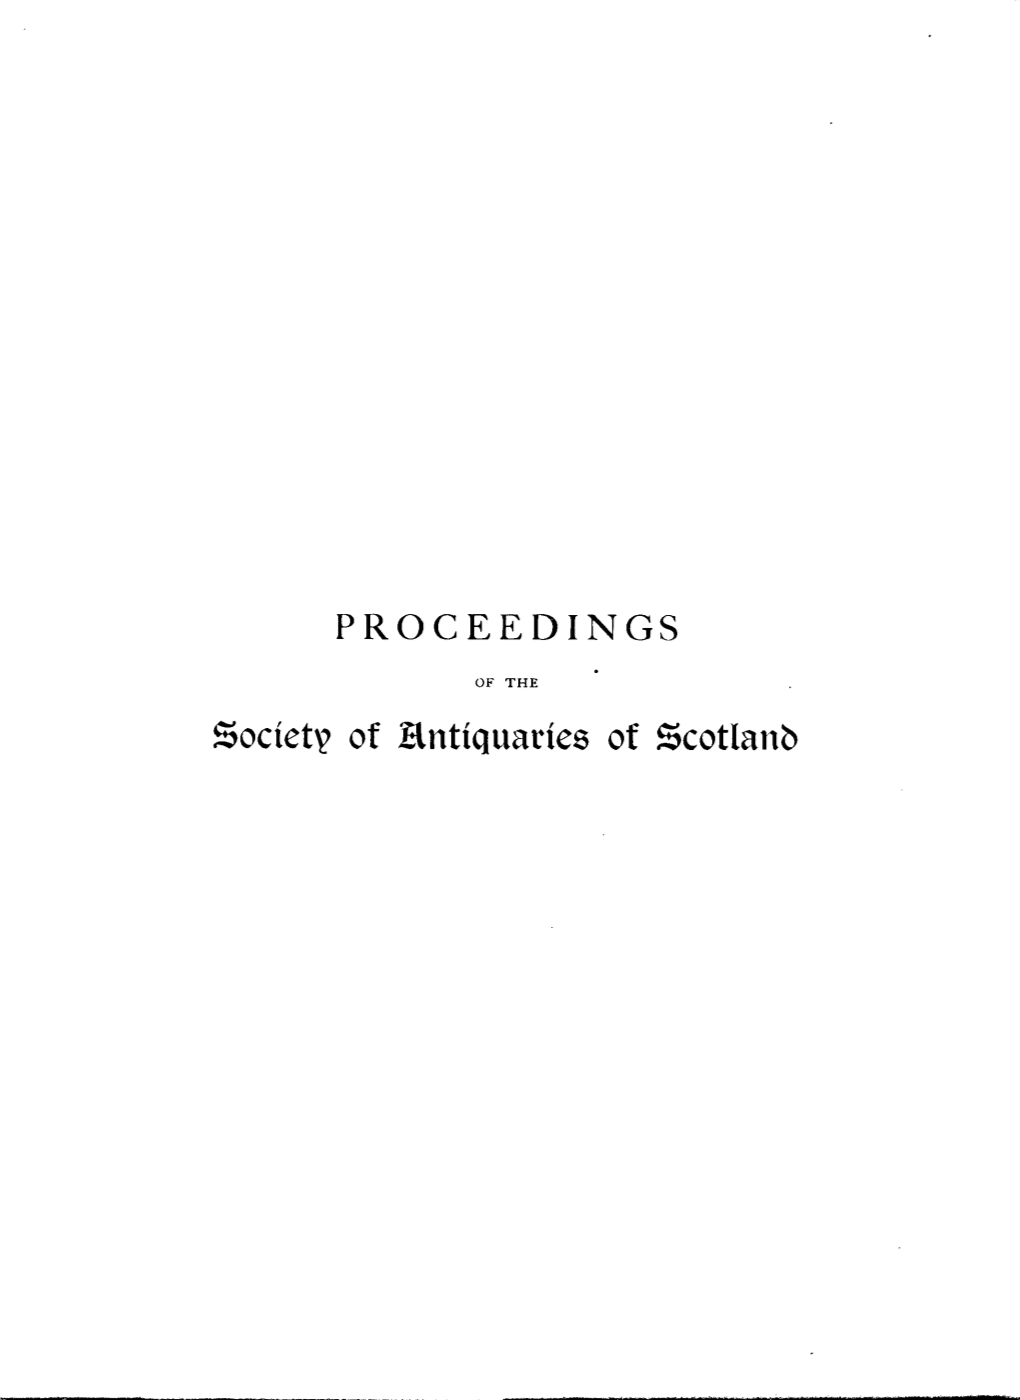 Society of Hnttquanes of Scotland PROCEEDINGS